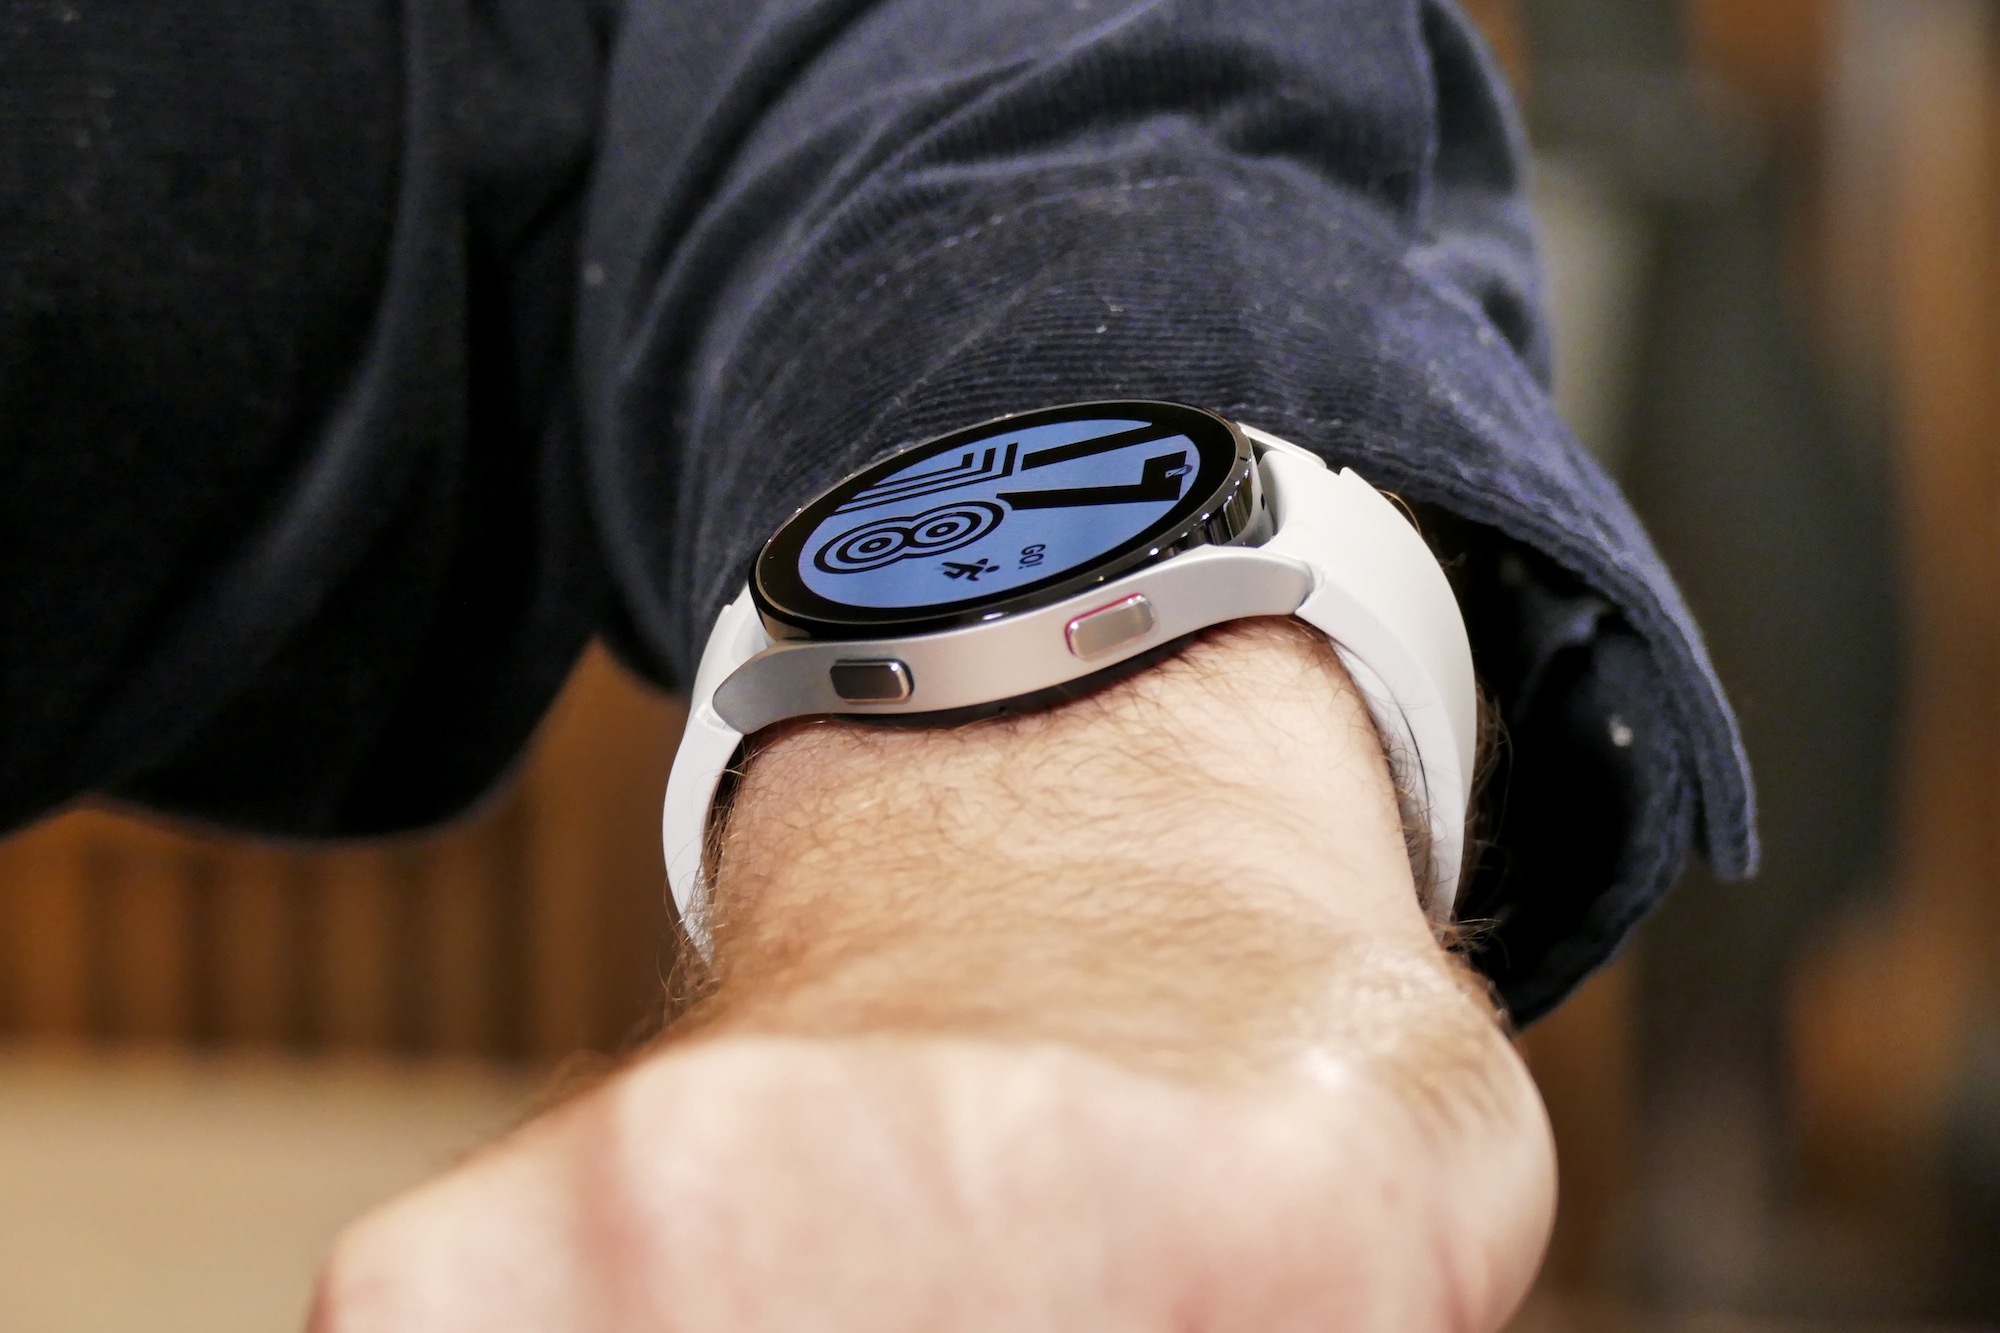 Galaxy Watch 4 on the wrist, showing side buttons.